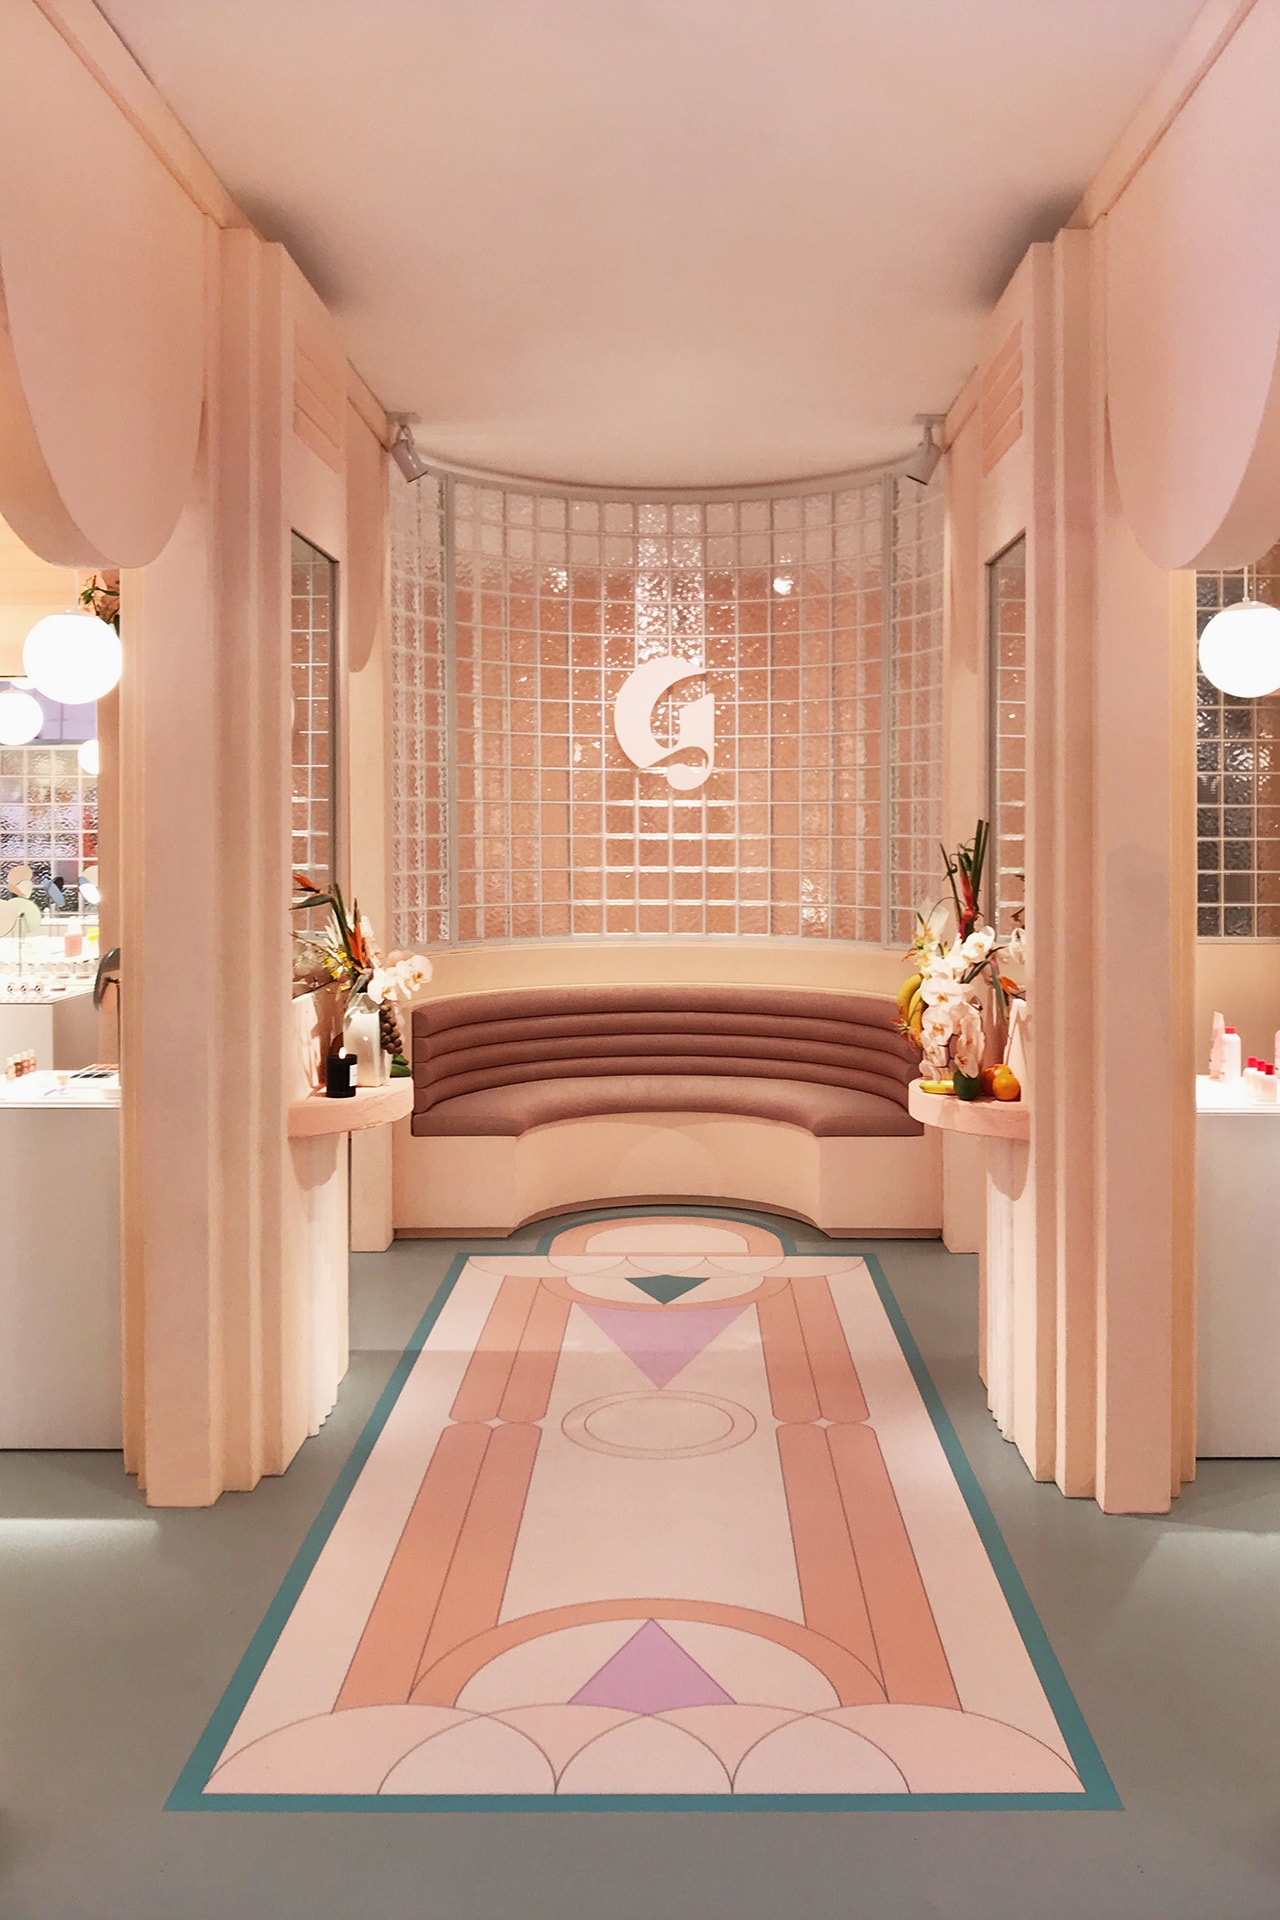 Glossier Miami Pop-Up Store 2019 Interior Emily Weiss Makeup Skincare Fragrance Beauty Cosmetics Pink Millennial Pastel Art Deco Design Mural Jacquie Comrie